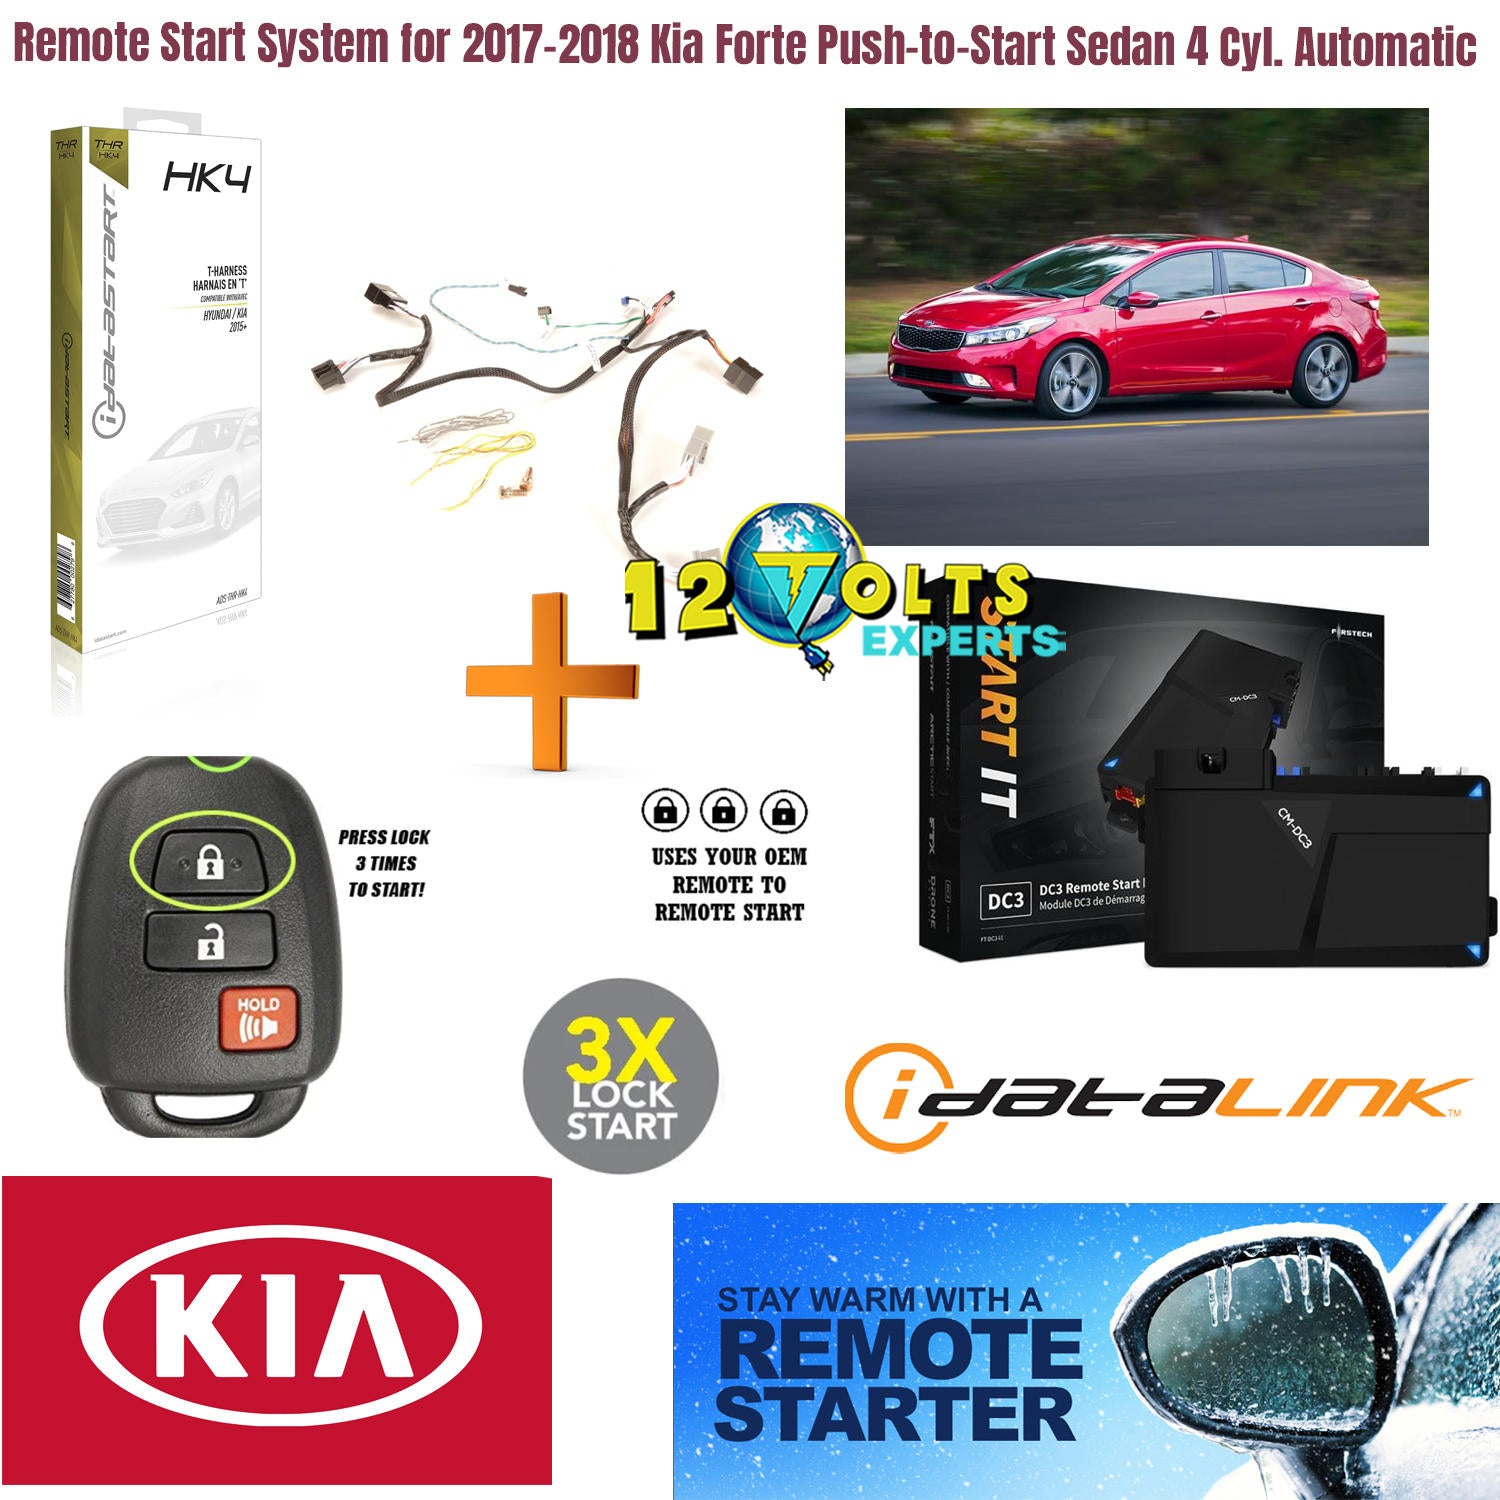 Remote Start System for 2017-2018 Kia Forte Push-to-Start Sedan 4 Cyl. Automatic